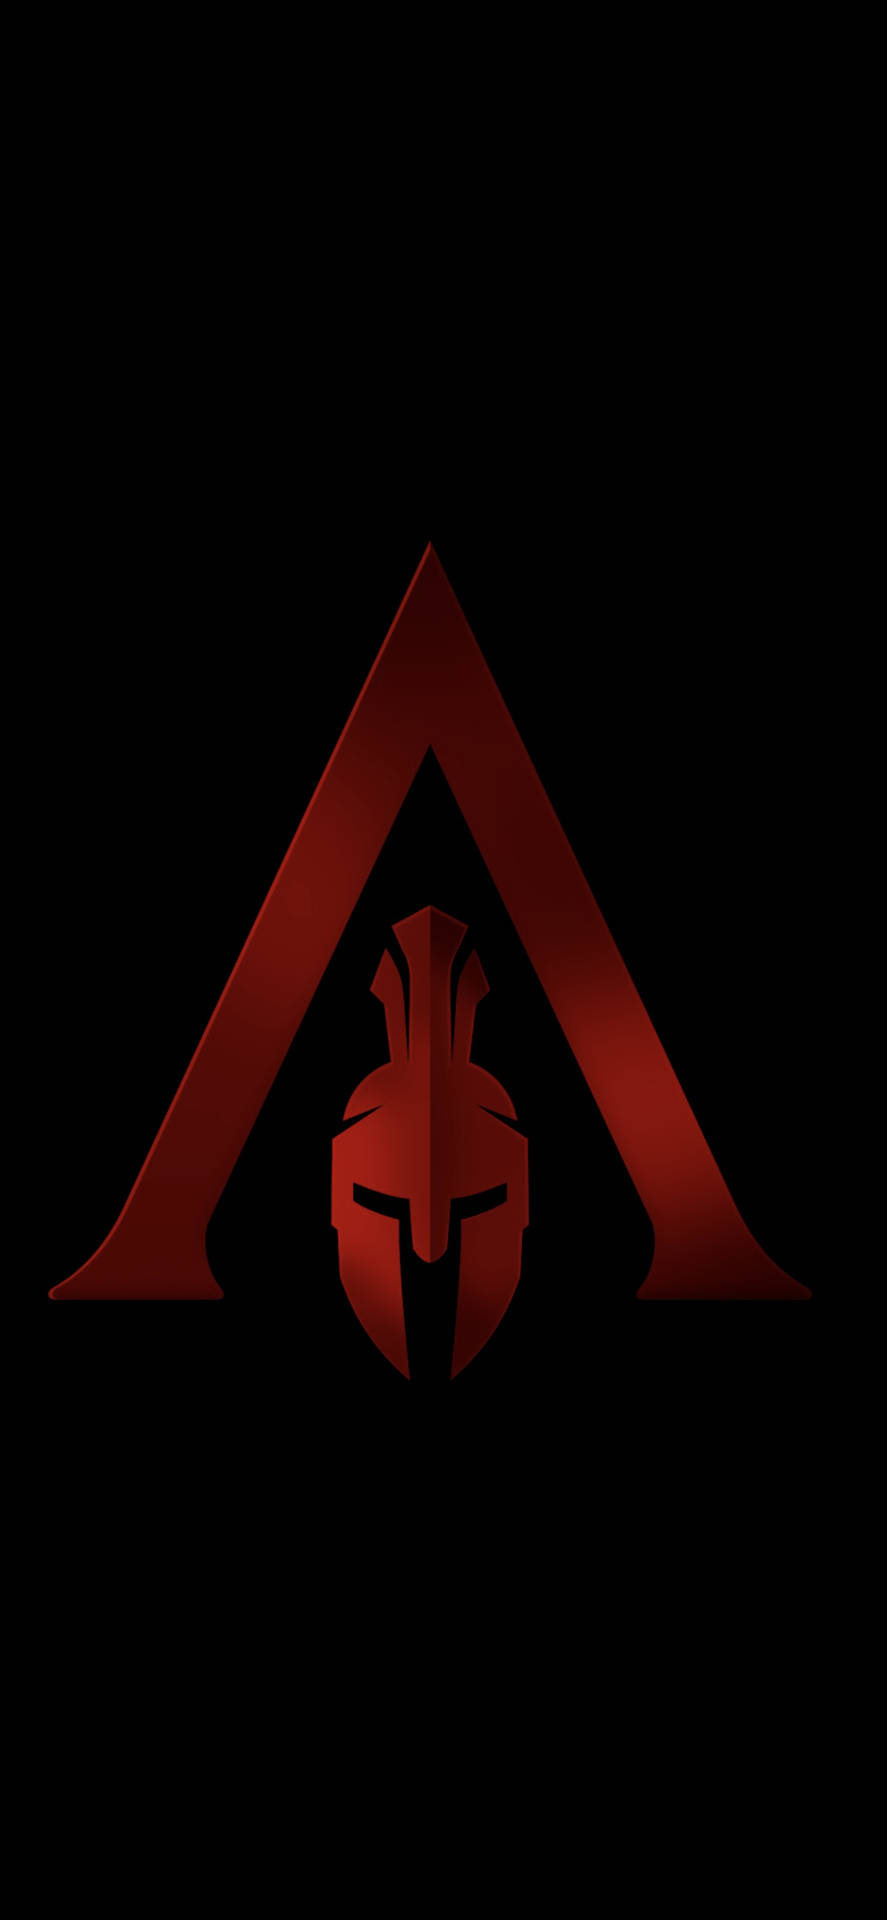 Assassin's Creed Logo In Red Odyssey Iphone